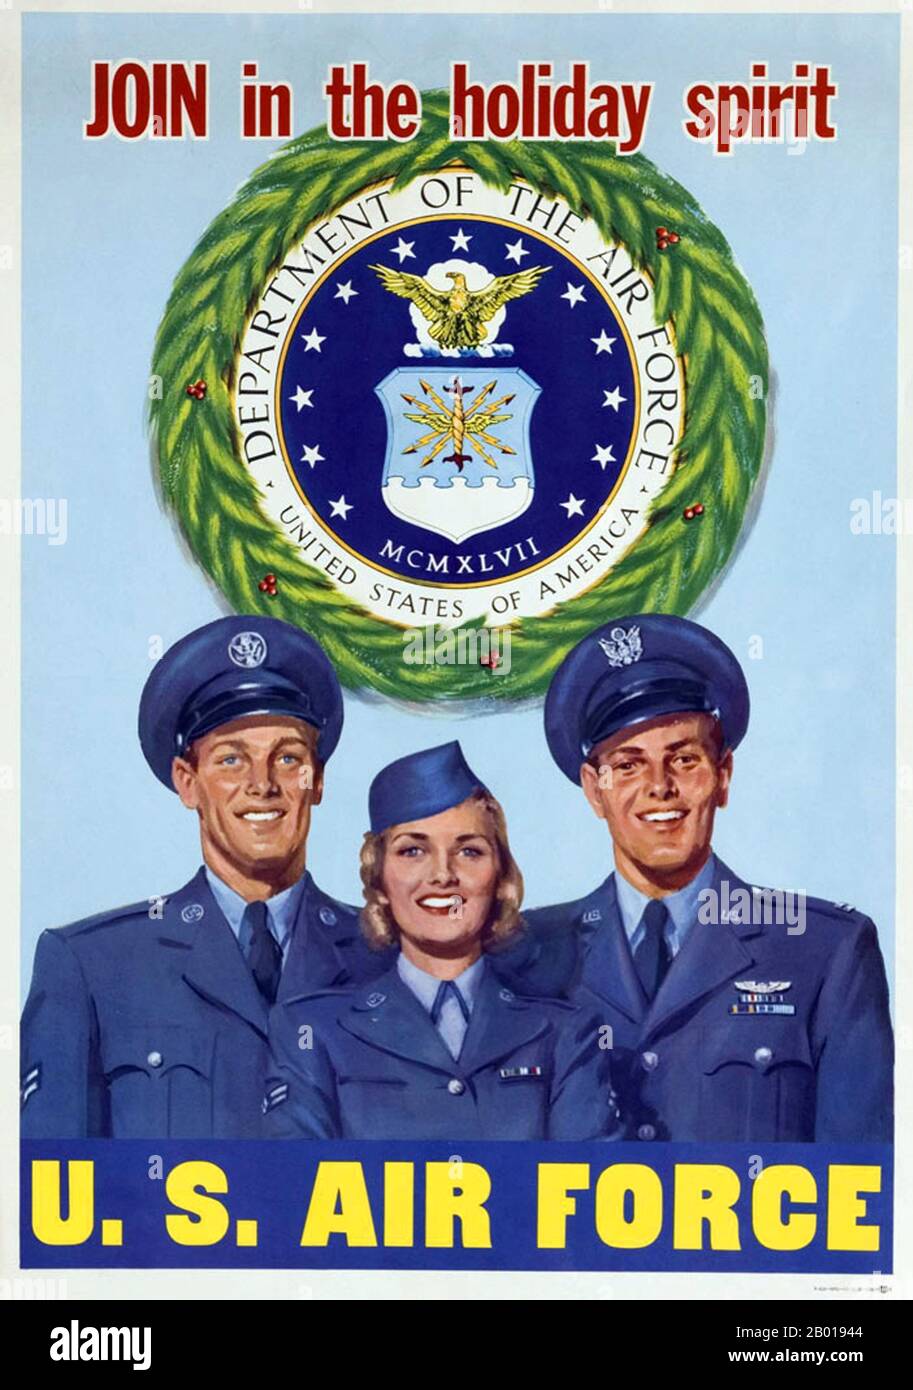 Korea/USA: A USAF recruiting poster from the last year of the Korean War (25 June 1950 - armistice signed 27 July 1953), 1953.  The Korean War was a military conflict between the Republic of Korea, supported by the United Nations, and North Korea, supported by the People's Republic of China (PRC), with military material aid from the Soviet Union. The war was a result of the physical division of Korea by an agreement of the victorious Allies at the conclusion of the Pacific War at the end of World War II. Stock Photo